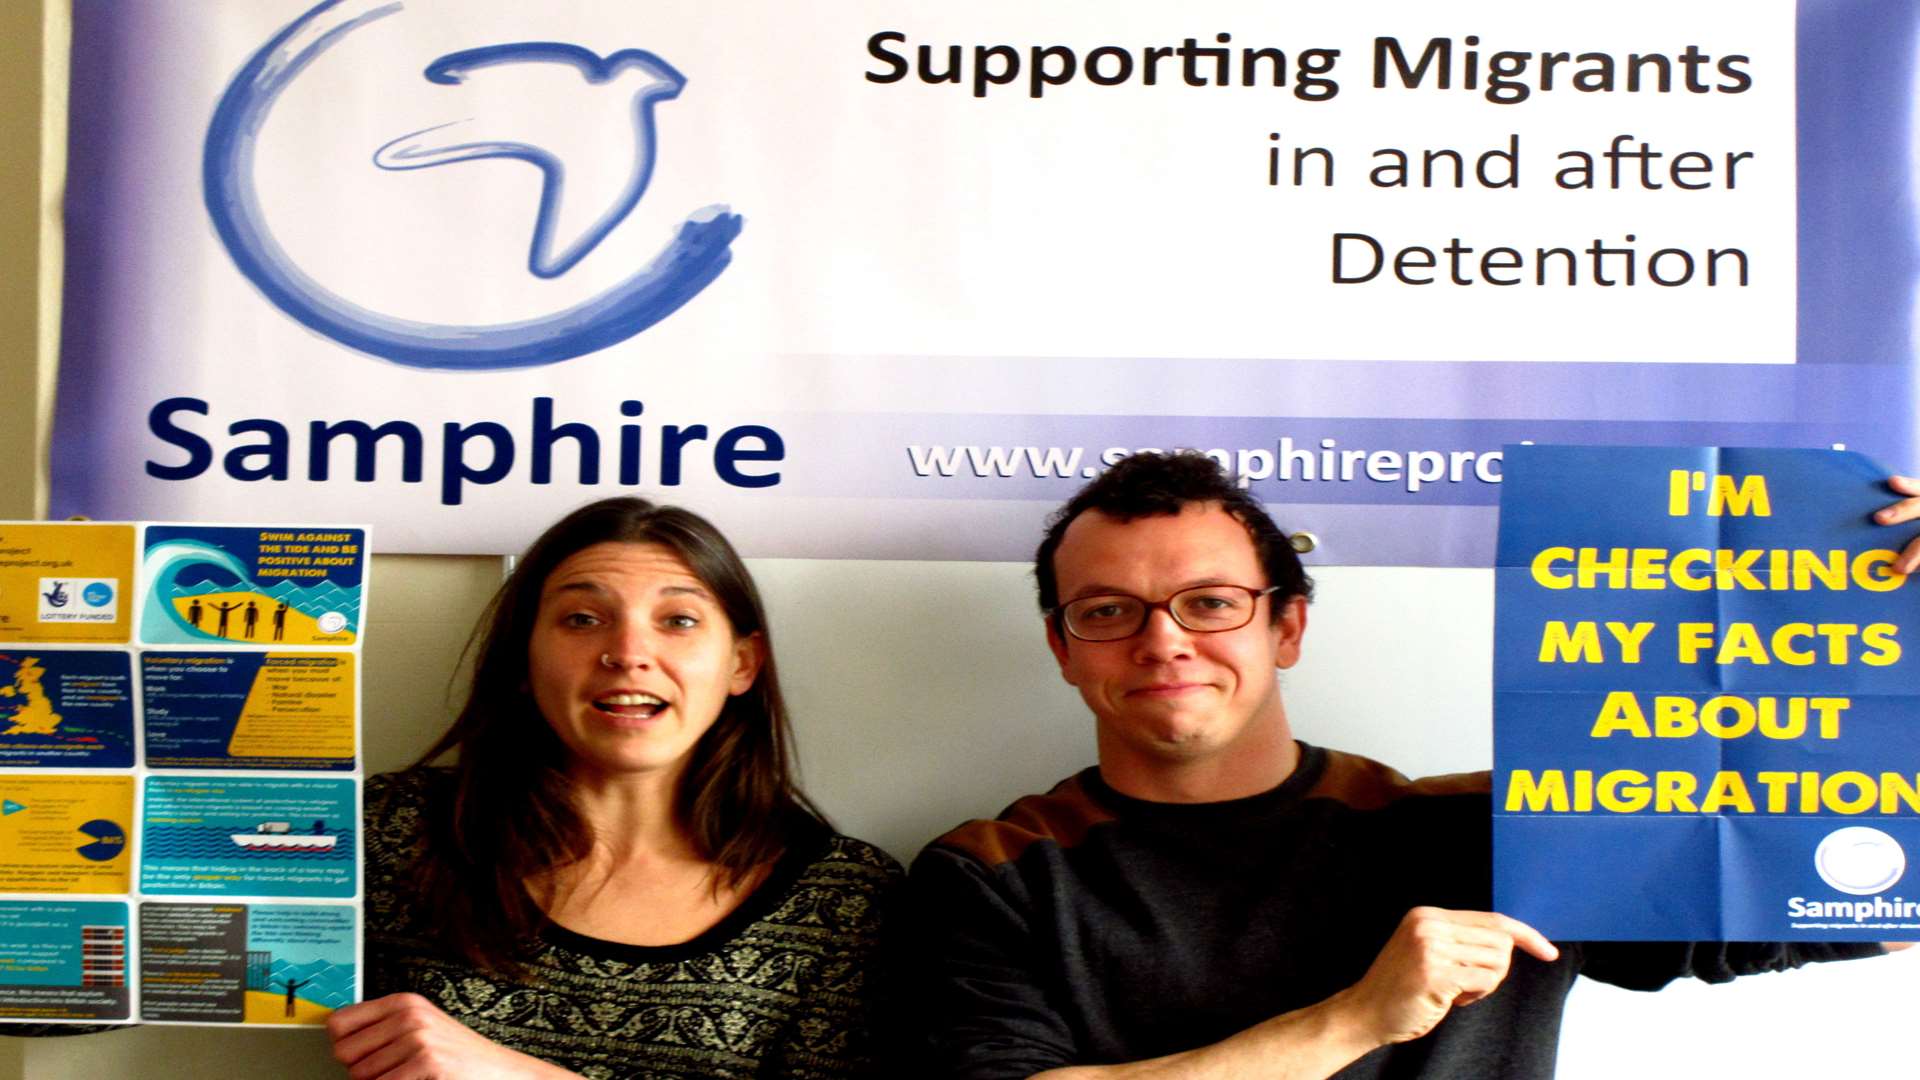 Charity Samphire hosted a successful meeting on migration in Dover with Rosa Potter and Fraser Paterson